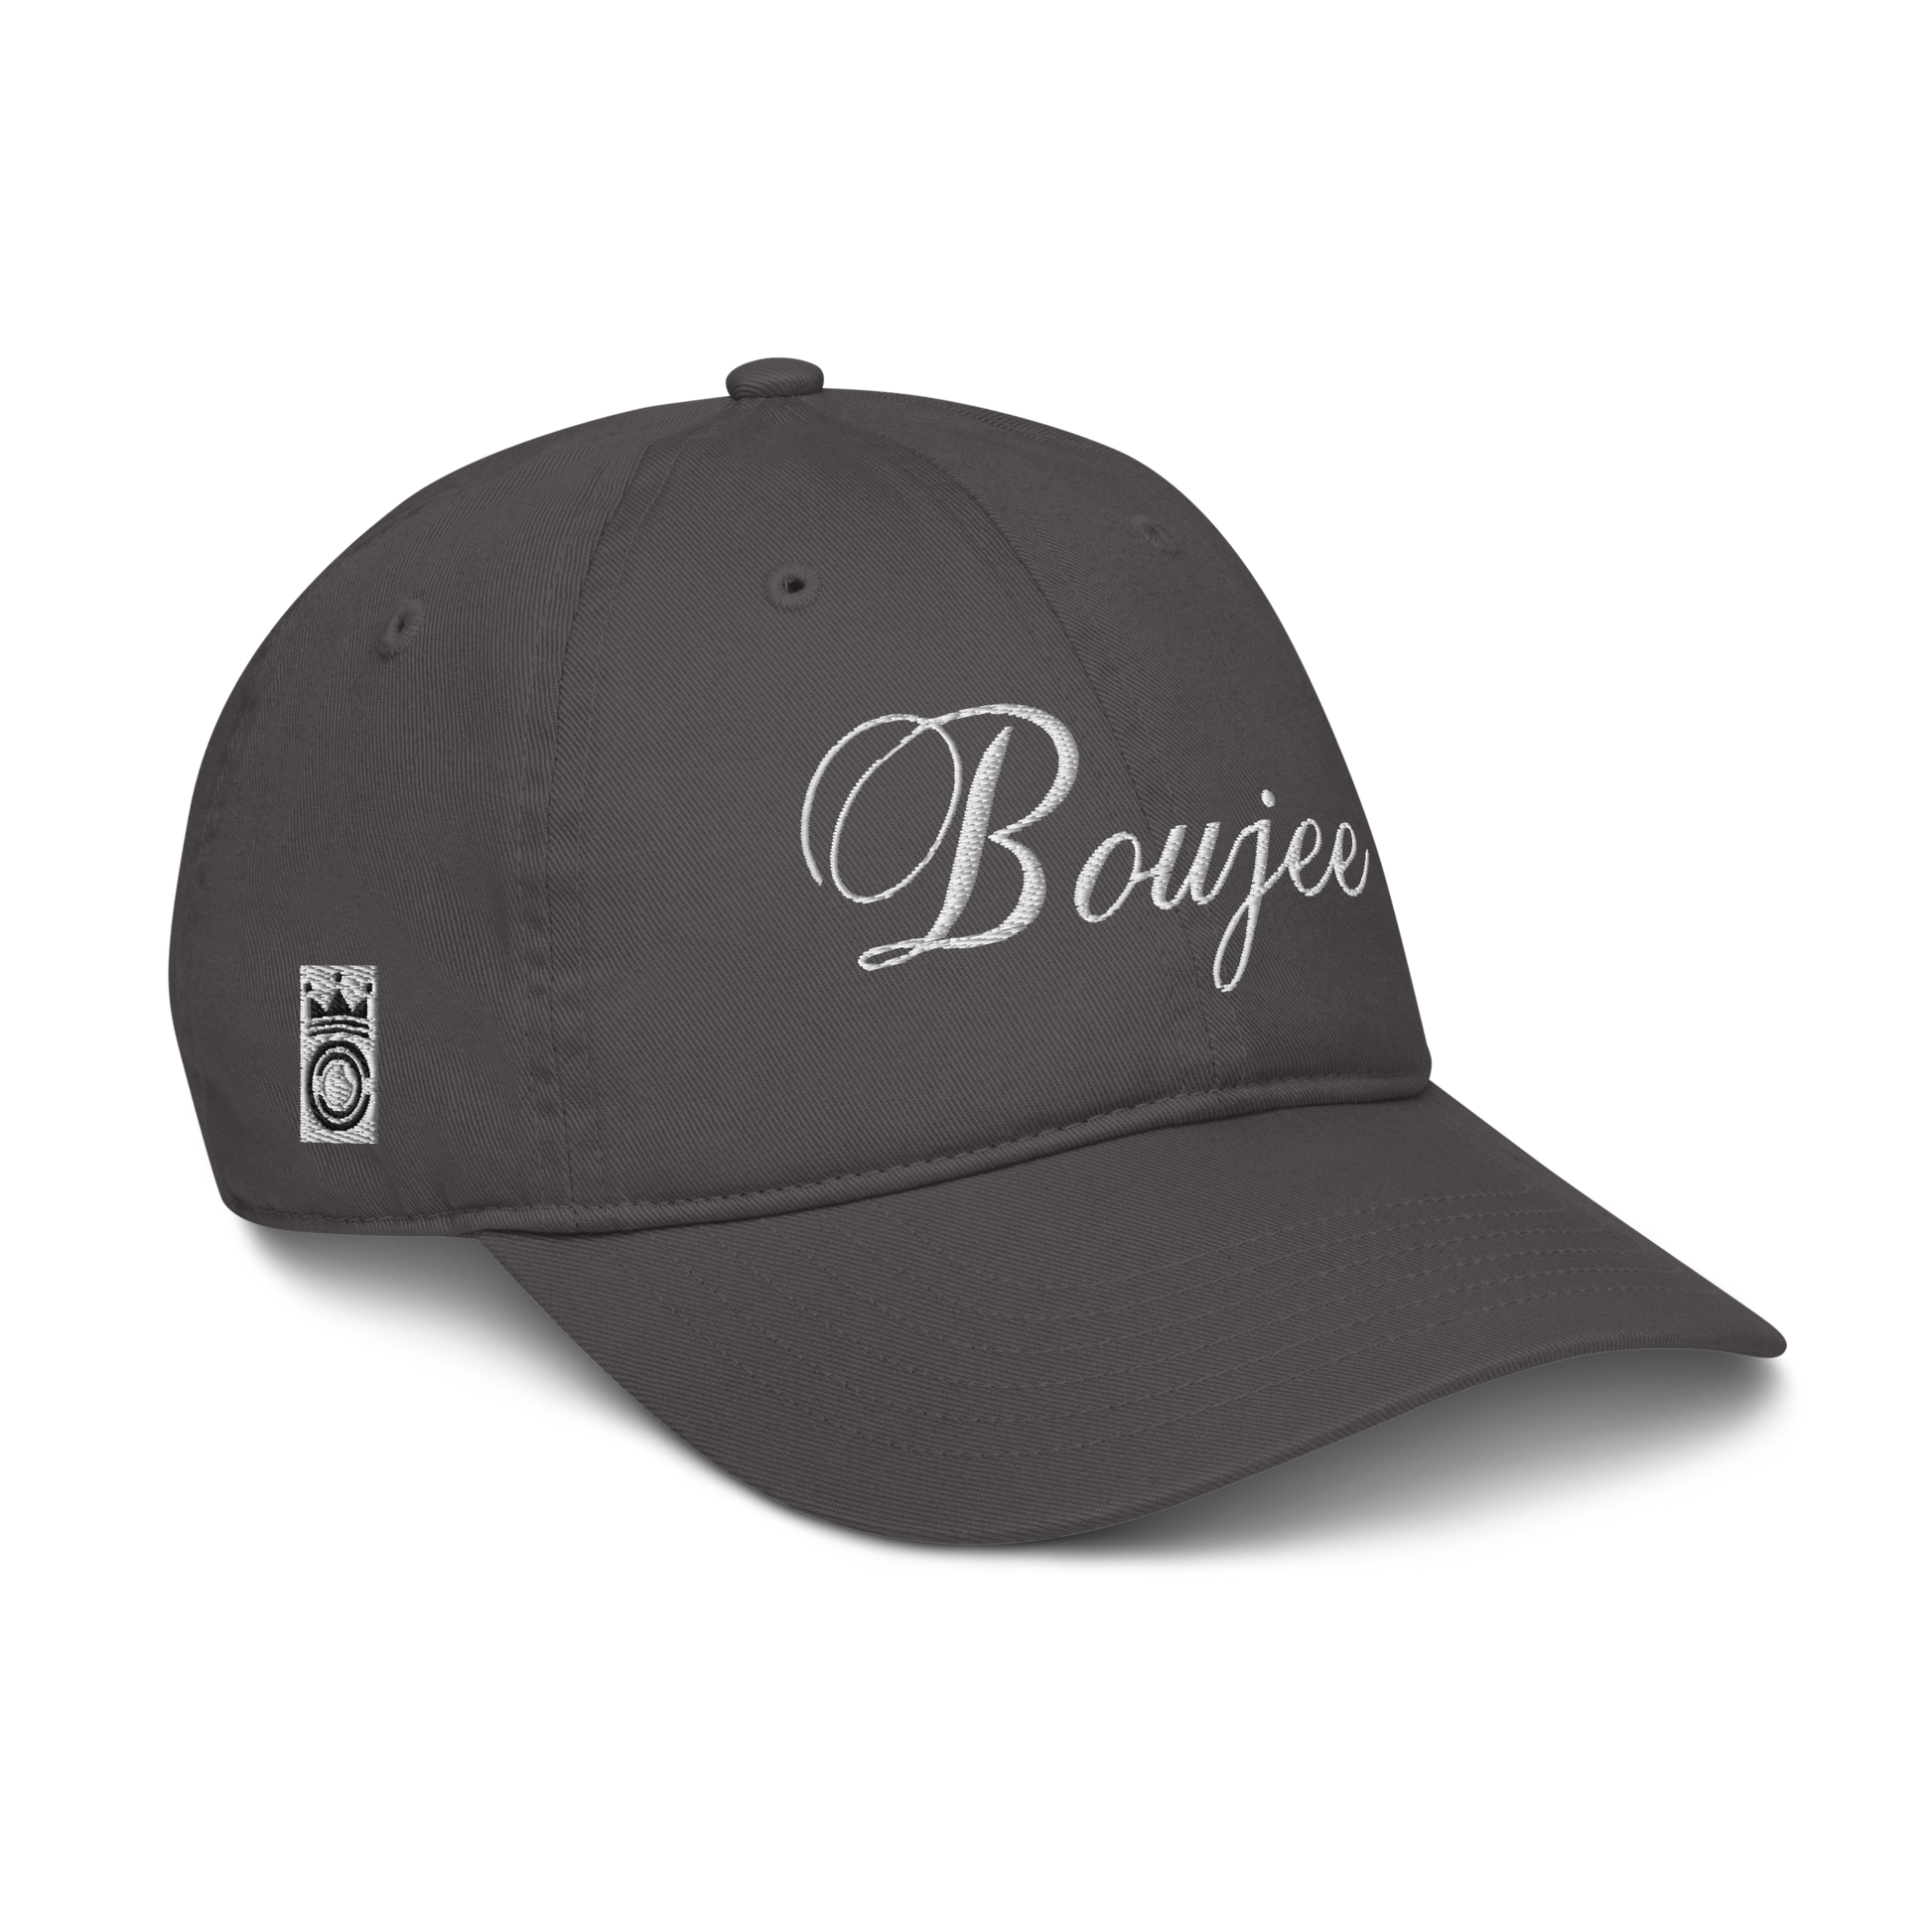 Discover the exquisite Boujee, the organic hat that exudes opulence and sophistication. Color: Gray